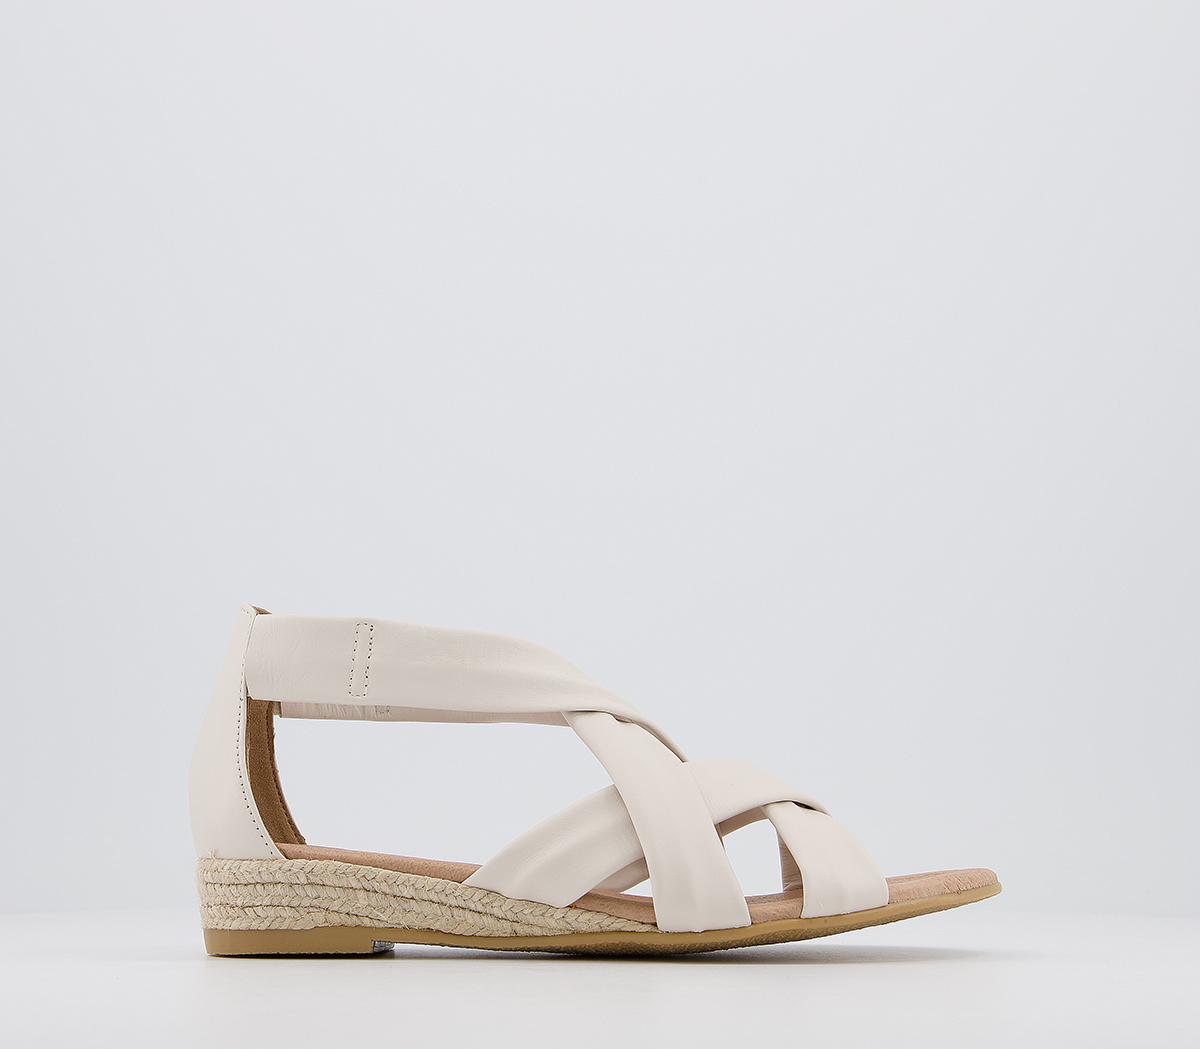 OFFICESonia Espadrille SandalsOff White Leather